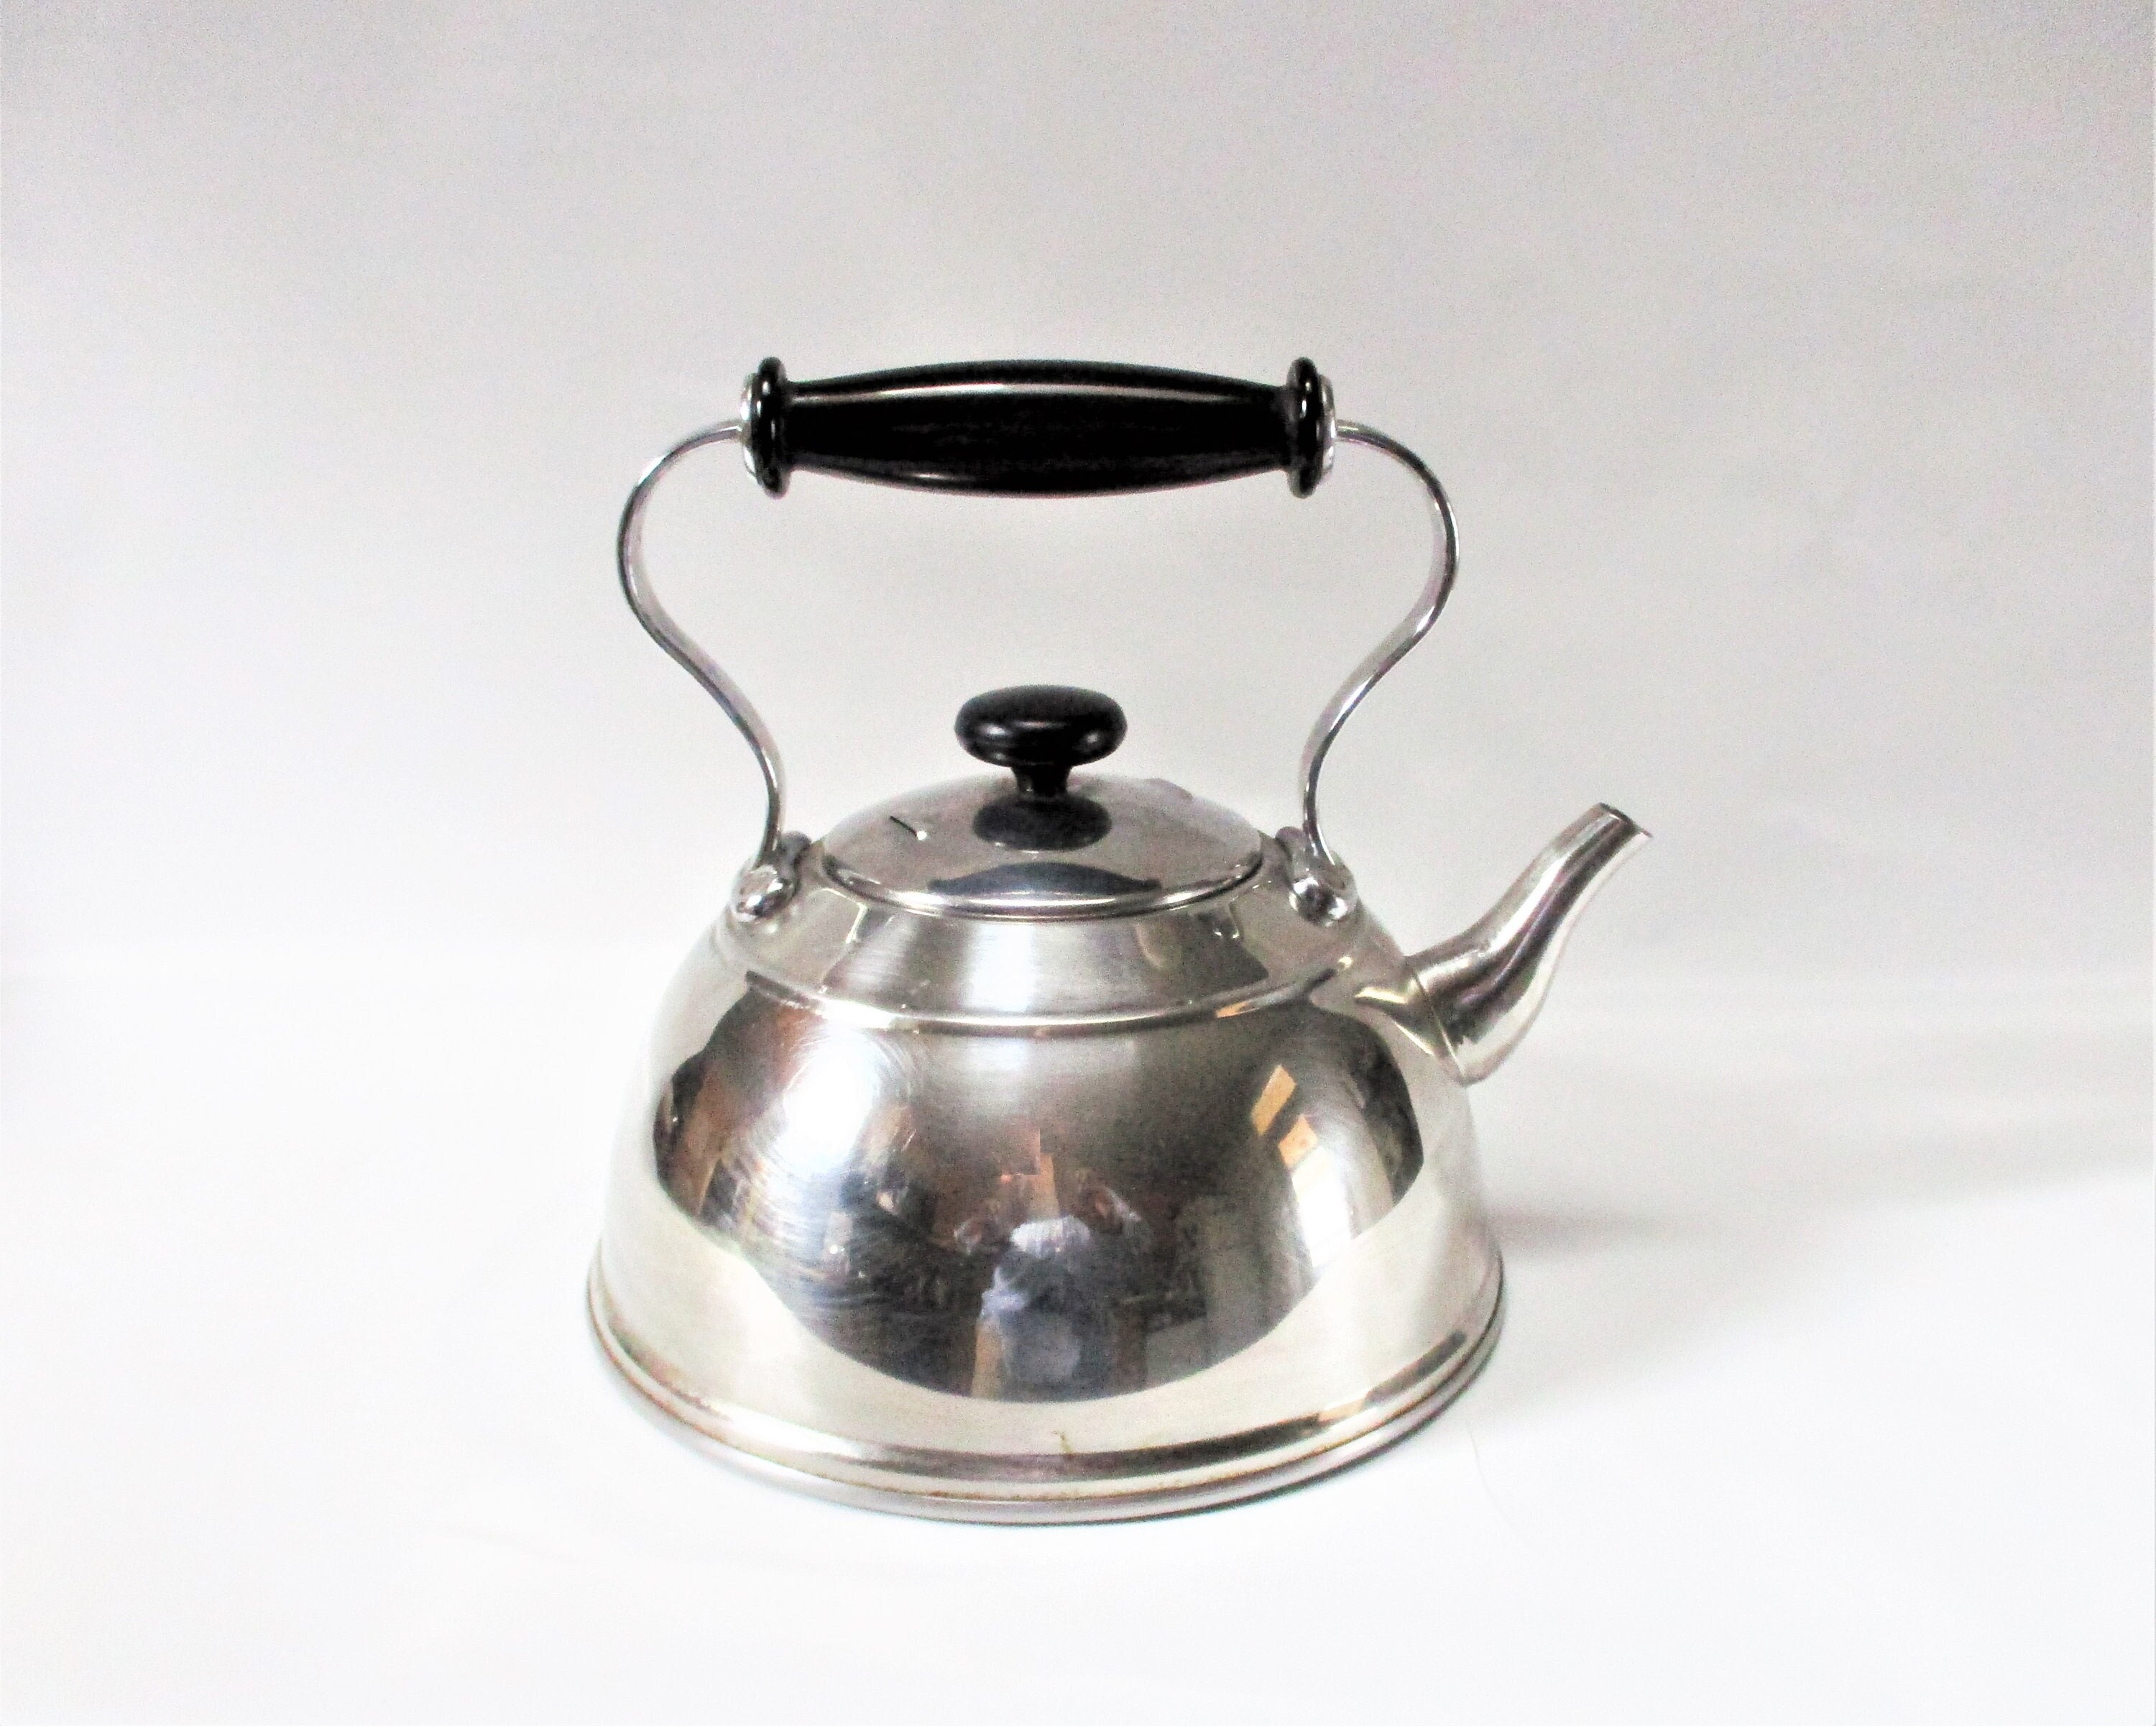 Vintage Stainless Steel Whistling Pour Over Coffee Kettle With Tea